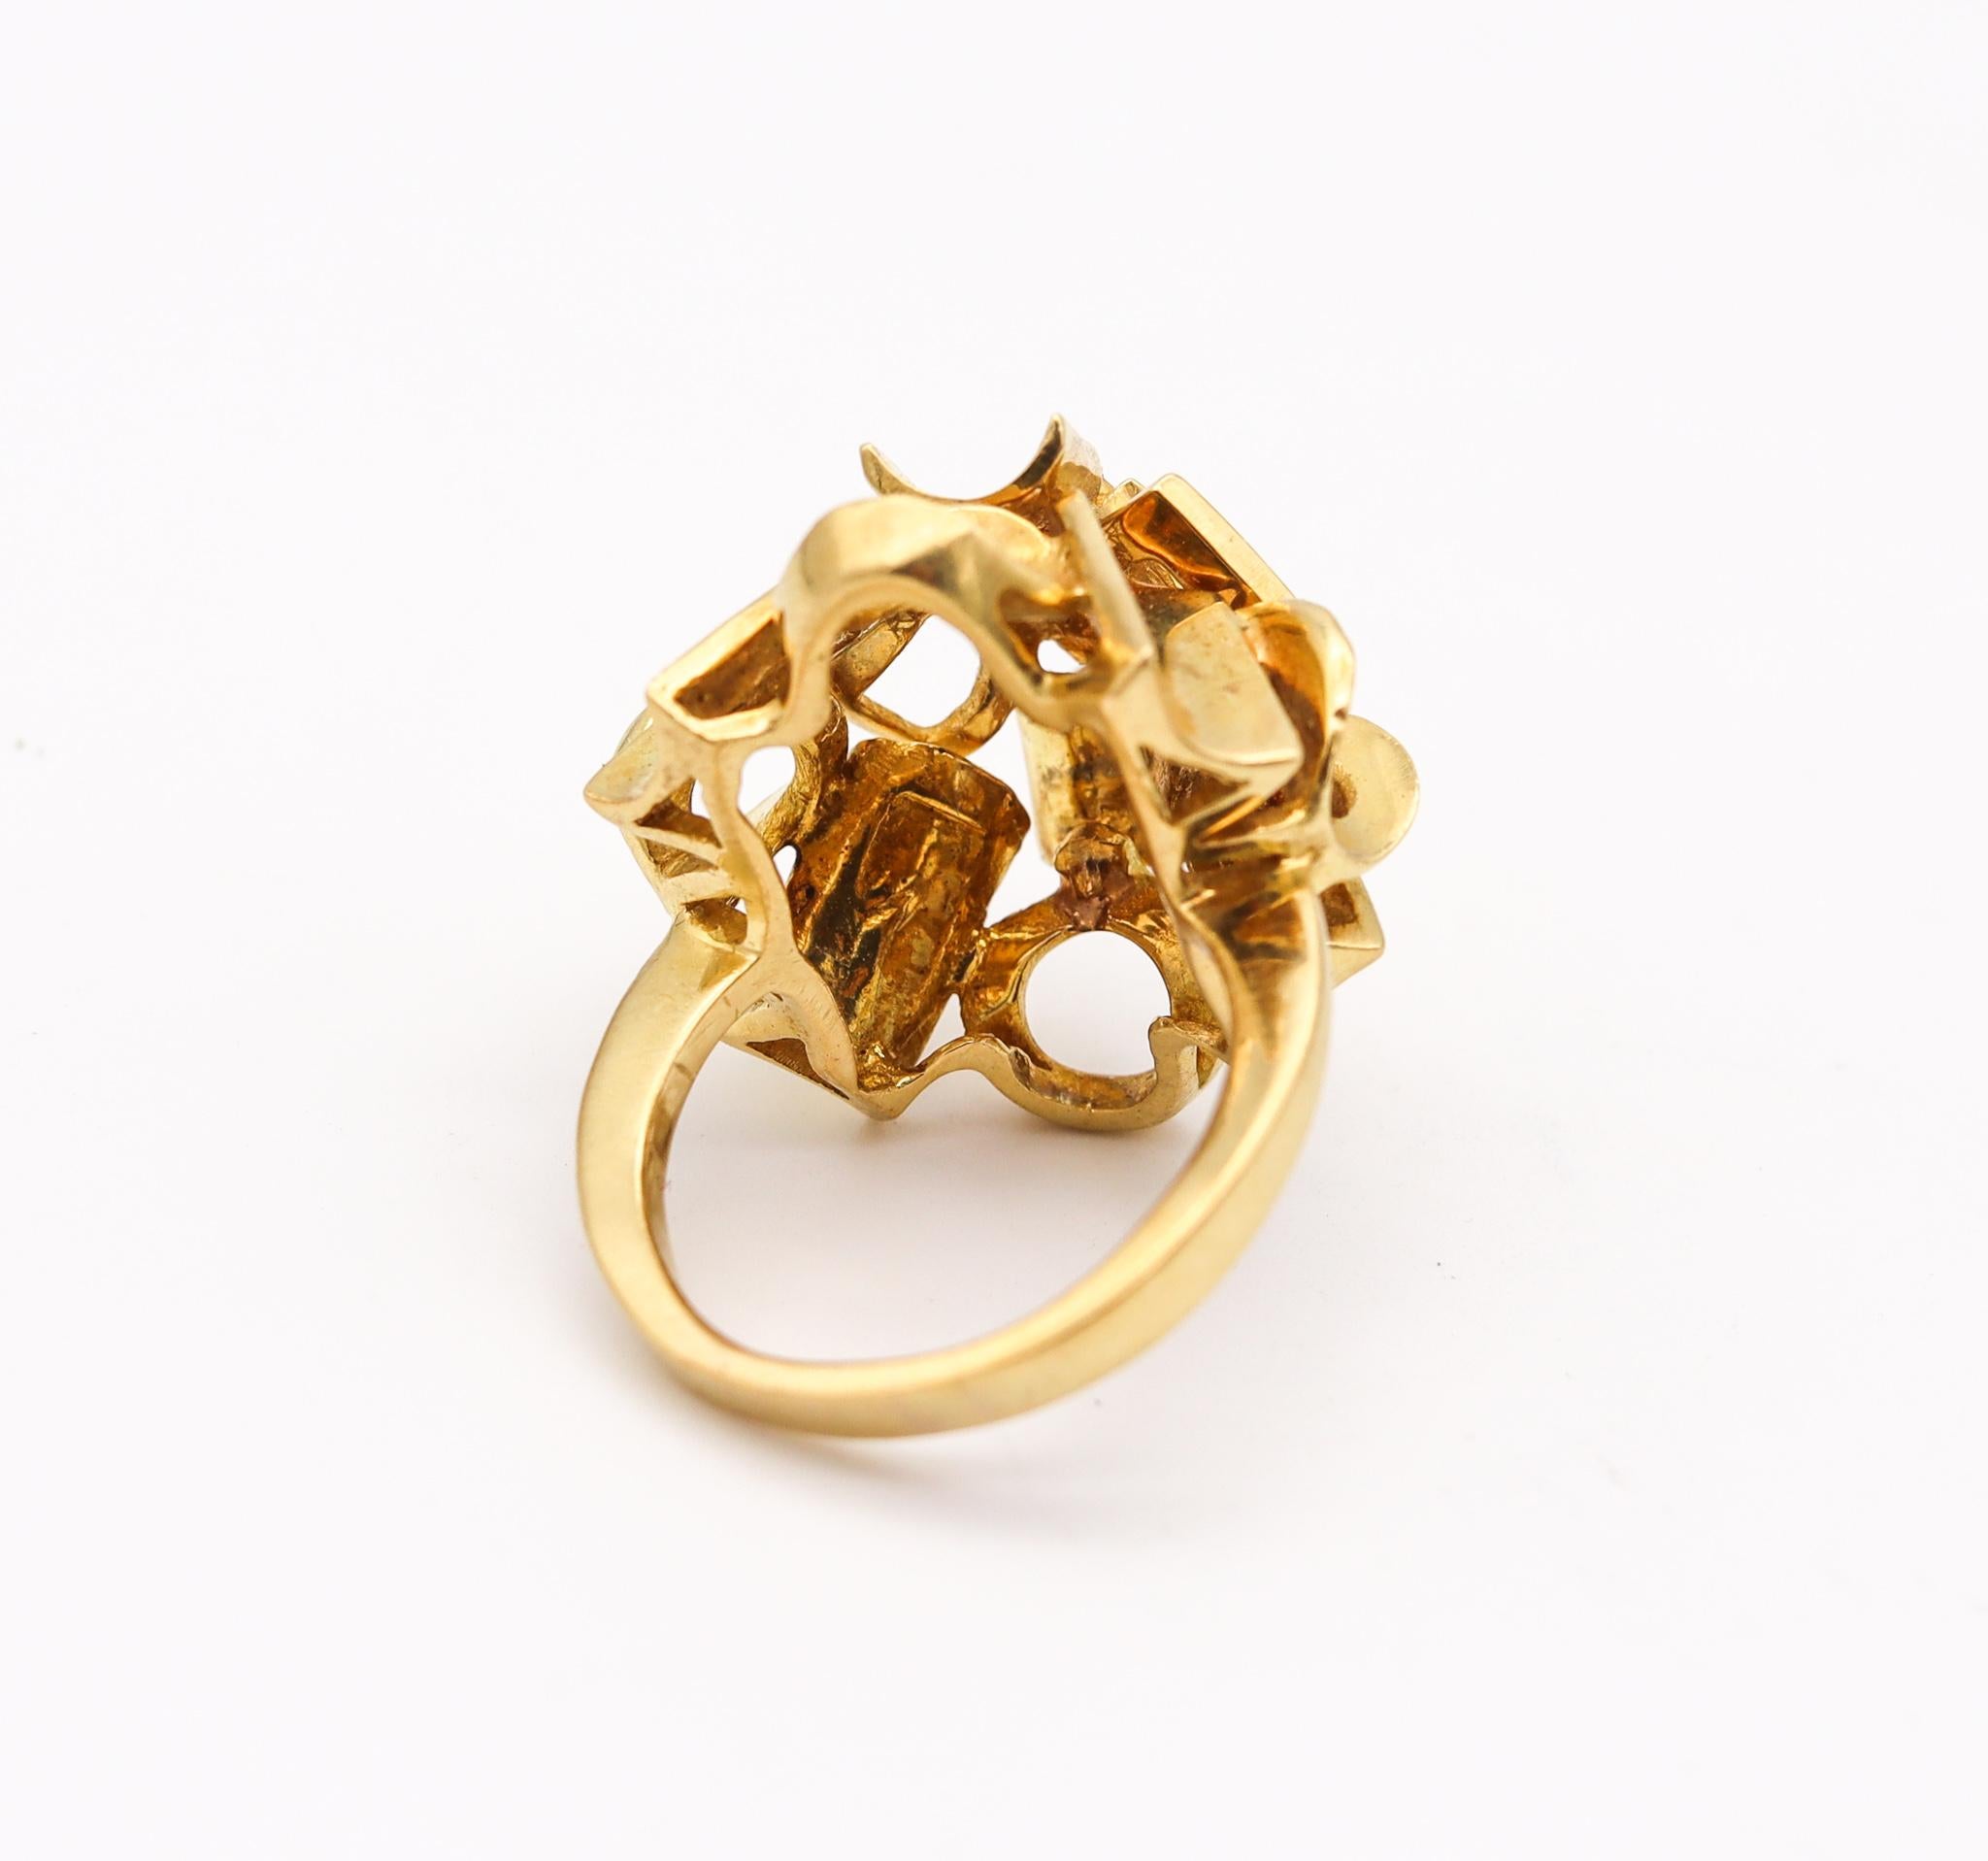 Brutalist 1970's Sculptural Geometric Cocktail Ring In Solid 18Kt Yellow Gold In Excellent Condition For Sale In Miami, FL